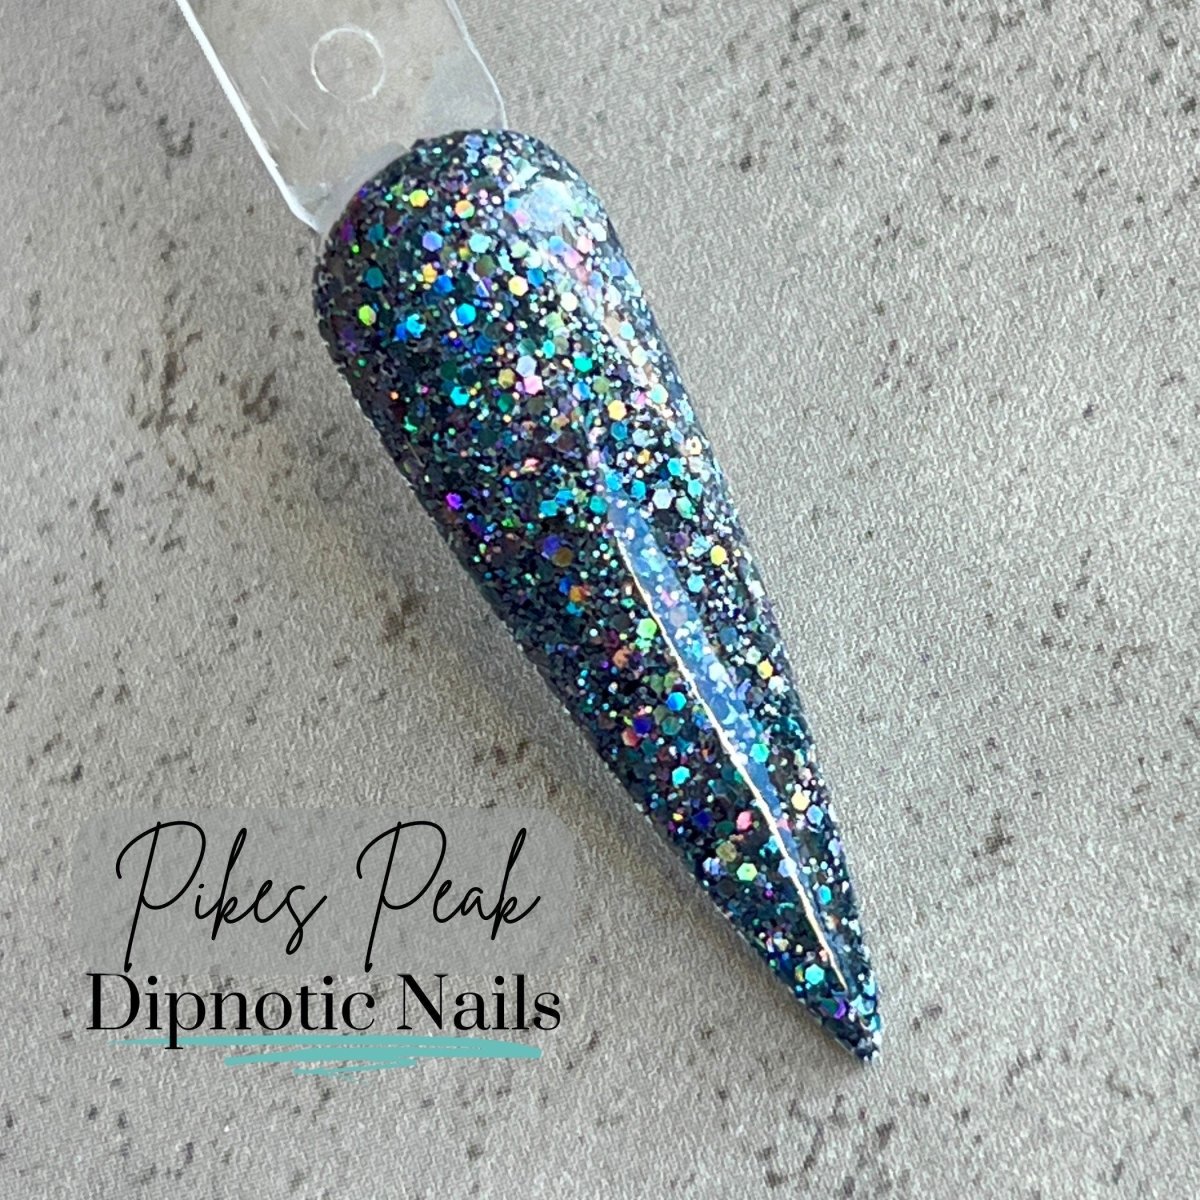 Photo shows swatch of Dipnotic Nails Pikes Peak Holographic Gunmetal Silver Dip Powder The Colorado Winter Collection